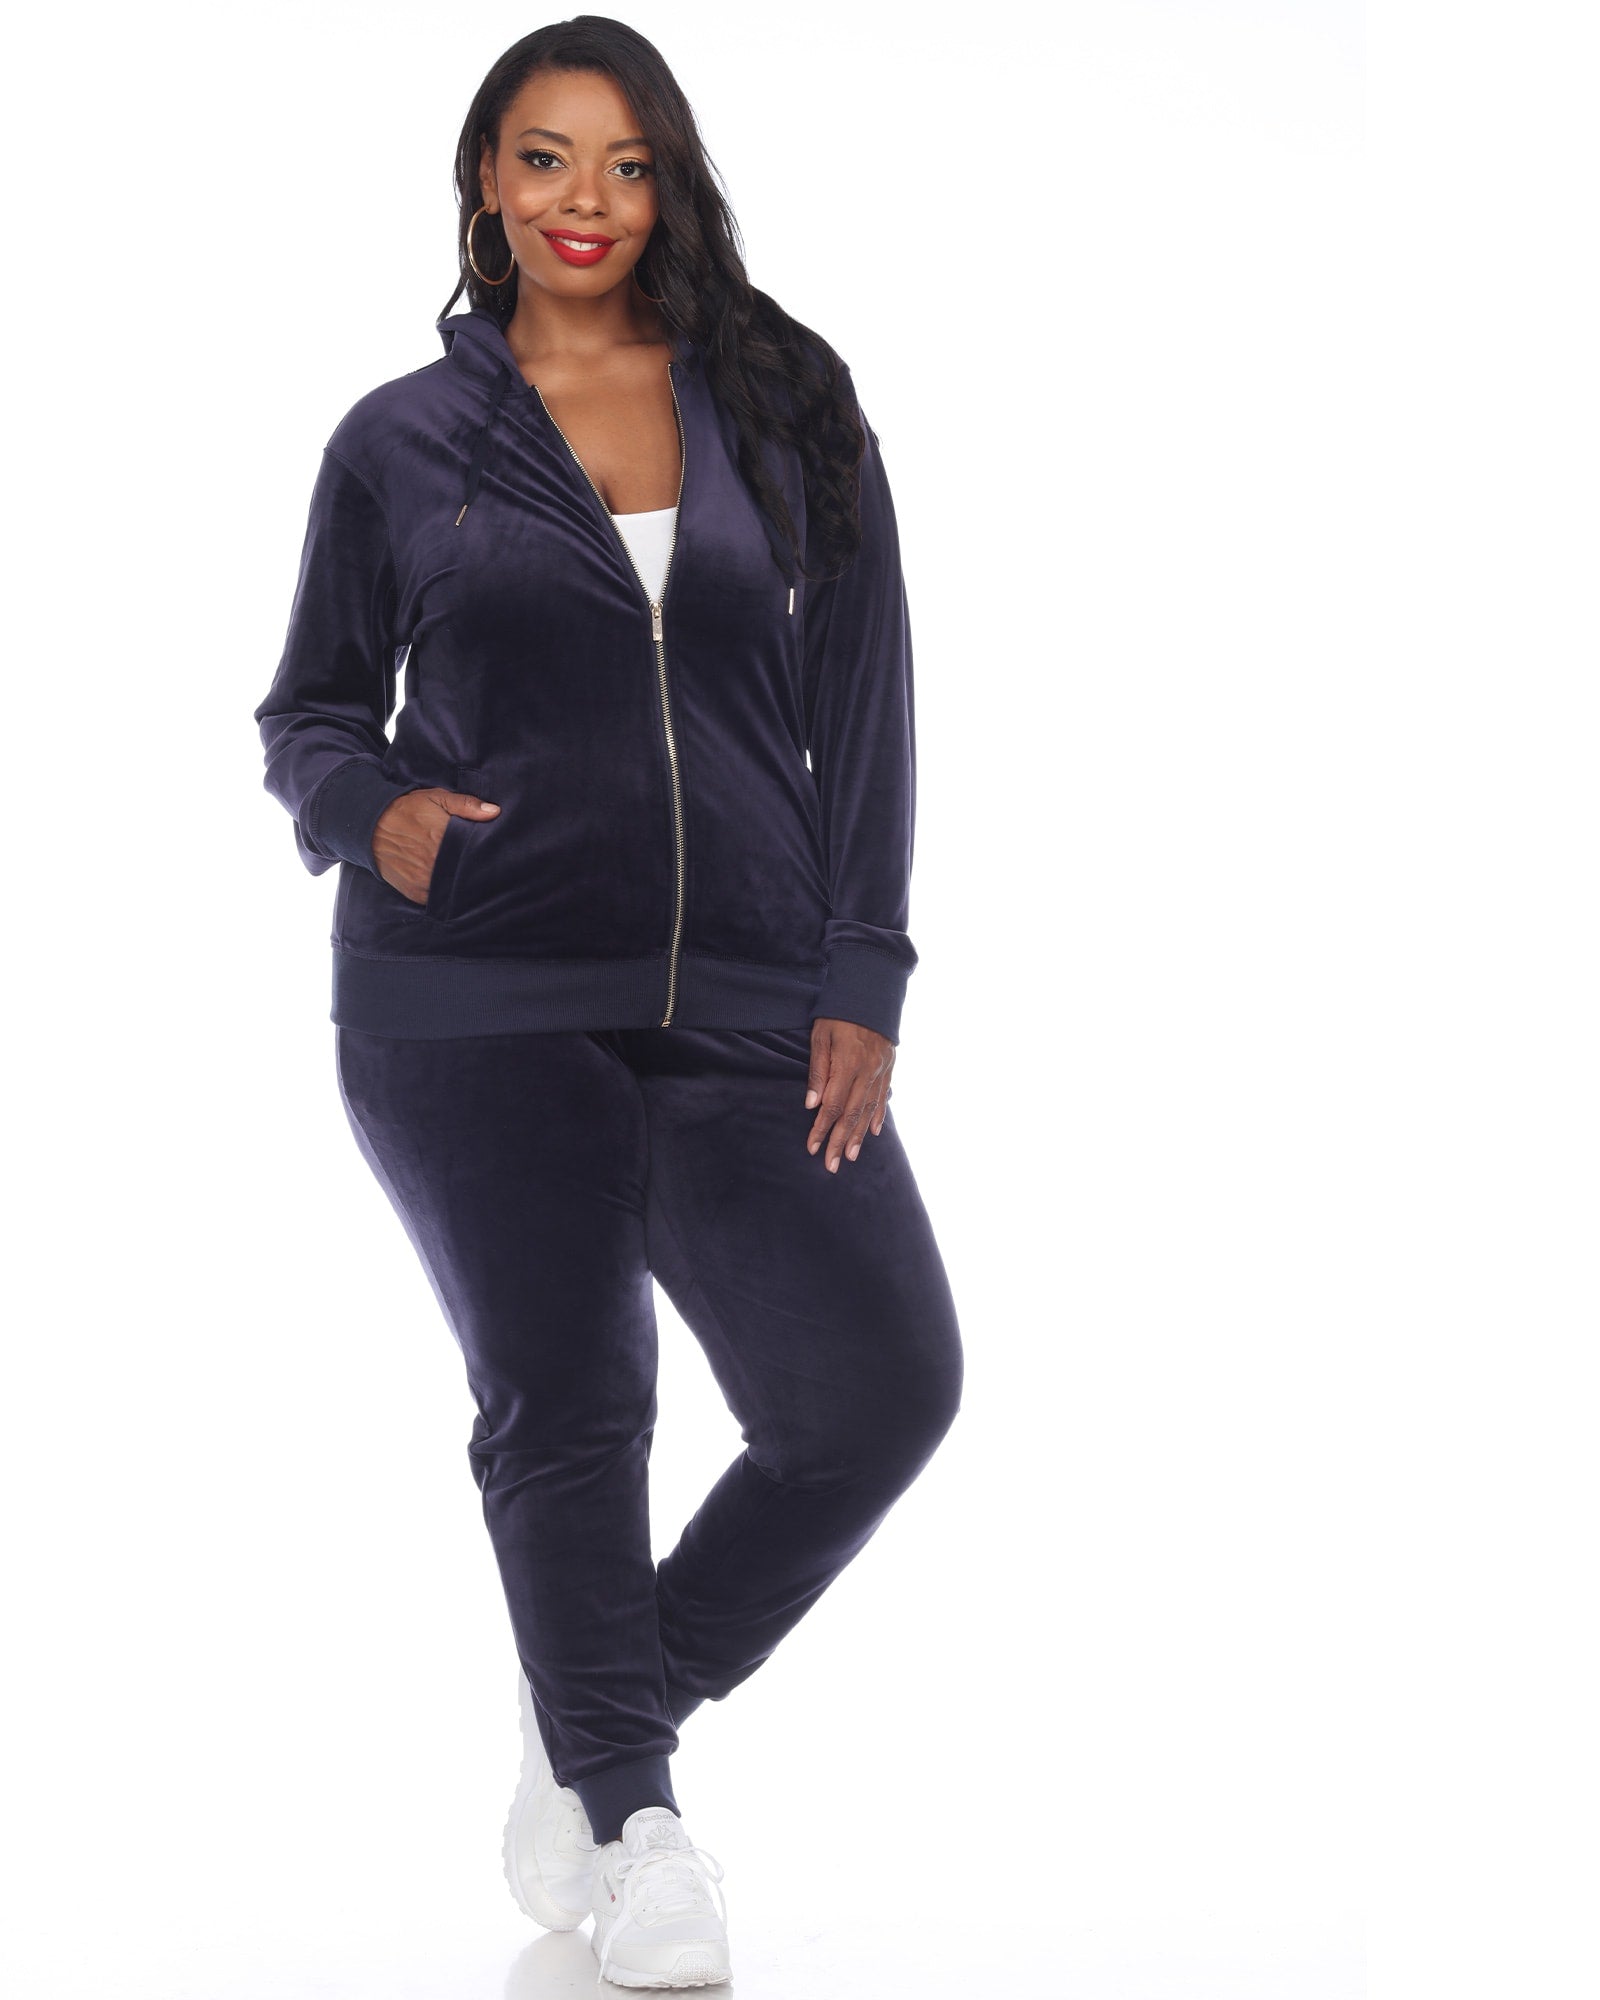 Womens Velvet Tracksuit Set Forth Long Sleeve, Plus Size, Fashionable  Leisure Suit In 4XL From Watchlove, $26.29